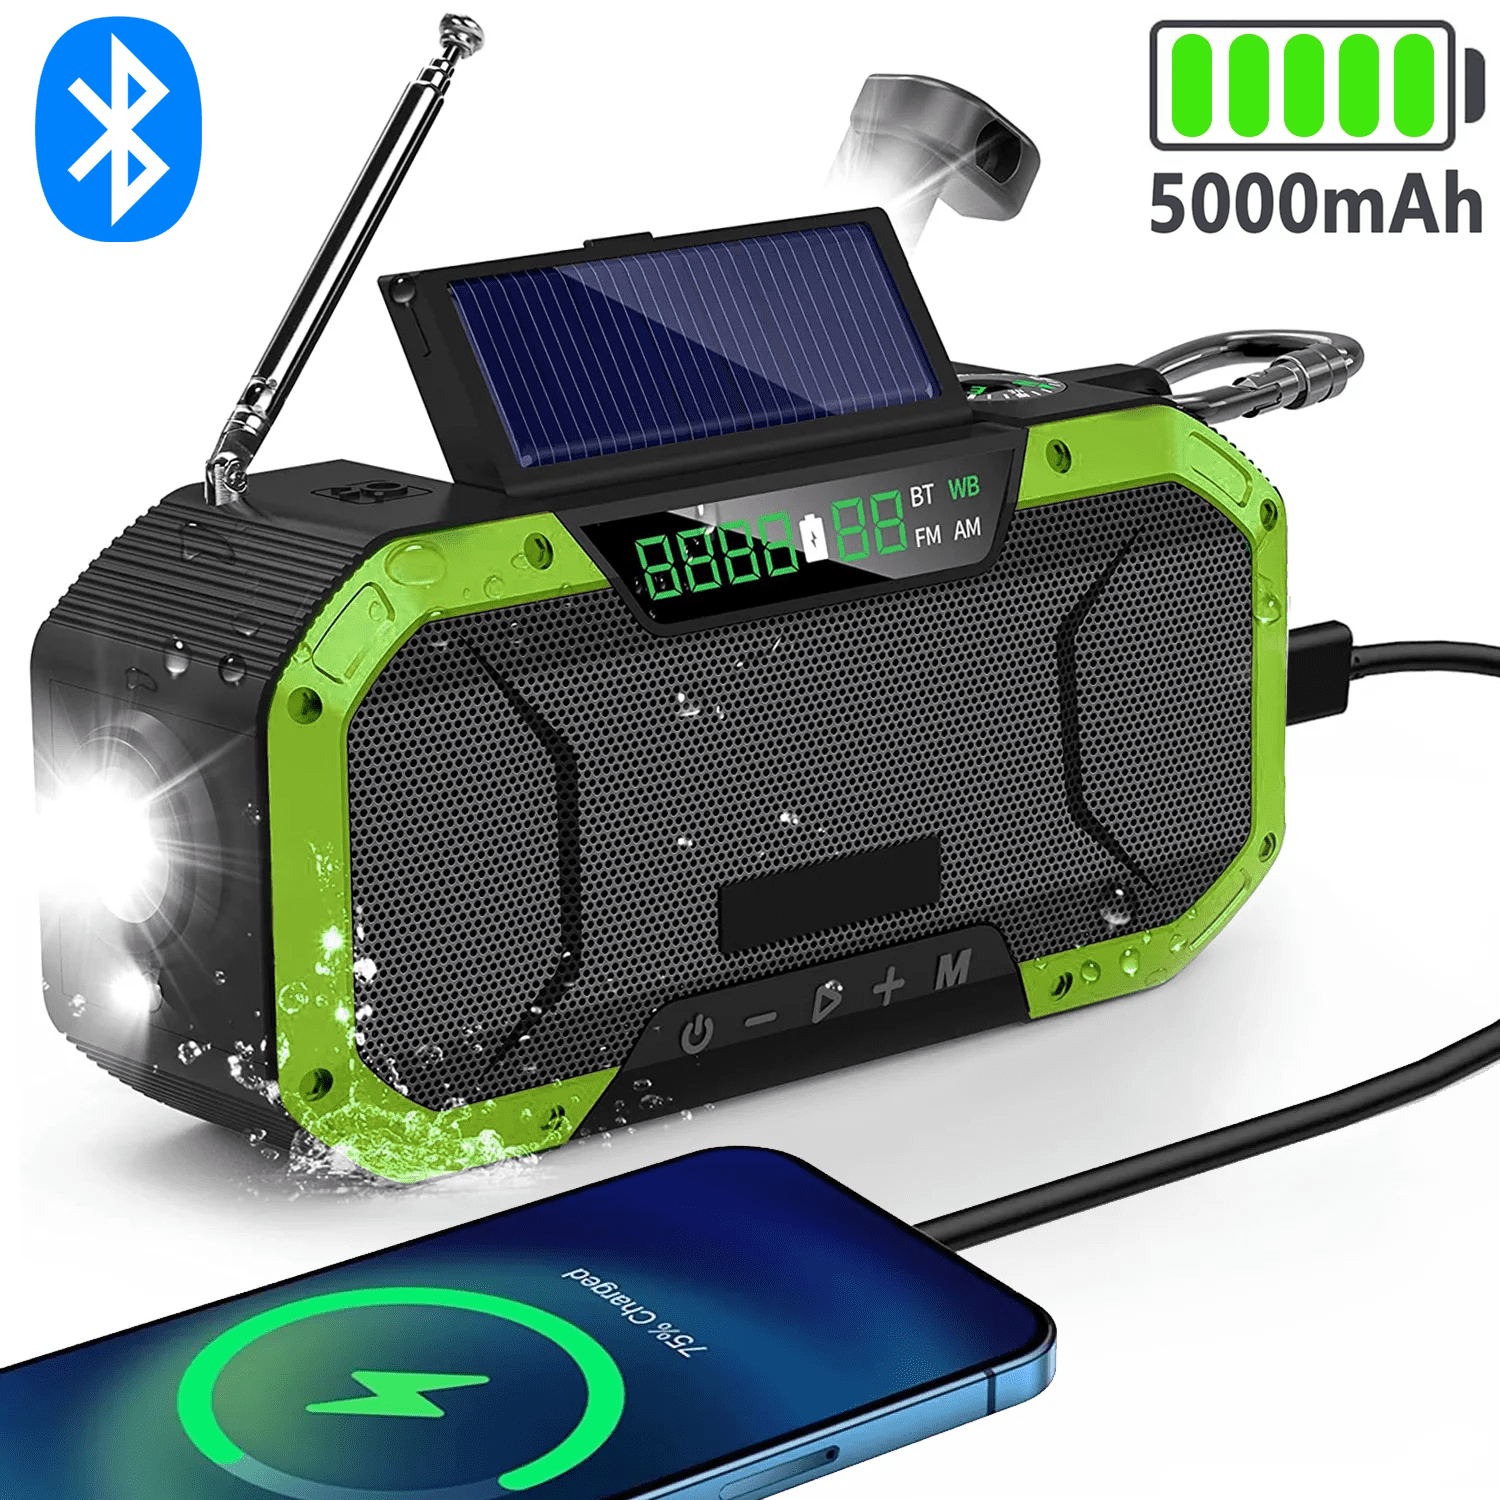 iFanze Emergency Weather Radio, 5000mAh Solar Hand Crank Radio, AM FM NOAA  Weather Alert Radio, Portable Radio with Cell Phone Charger, Bluetooth  Speakers, Flashlight, SOS for Hiking Camping